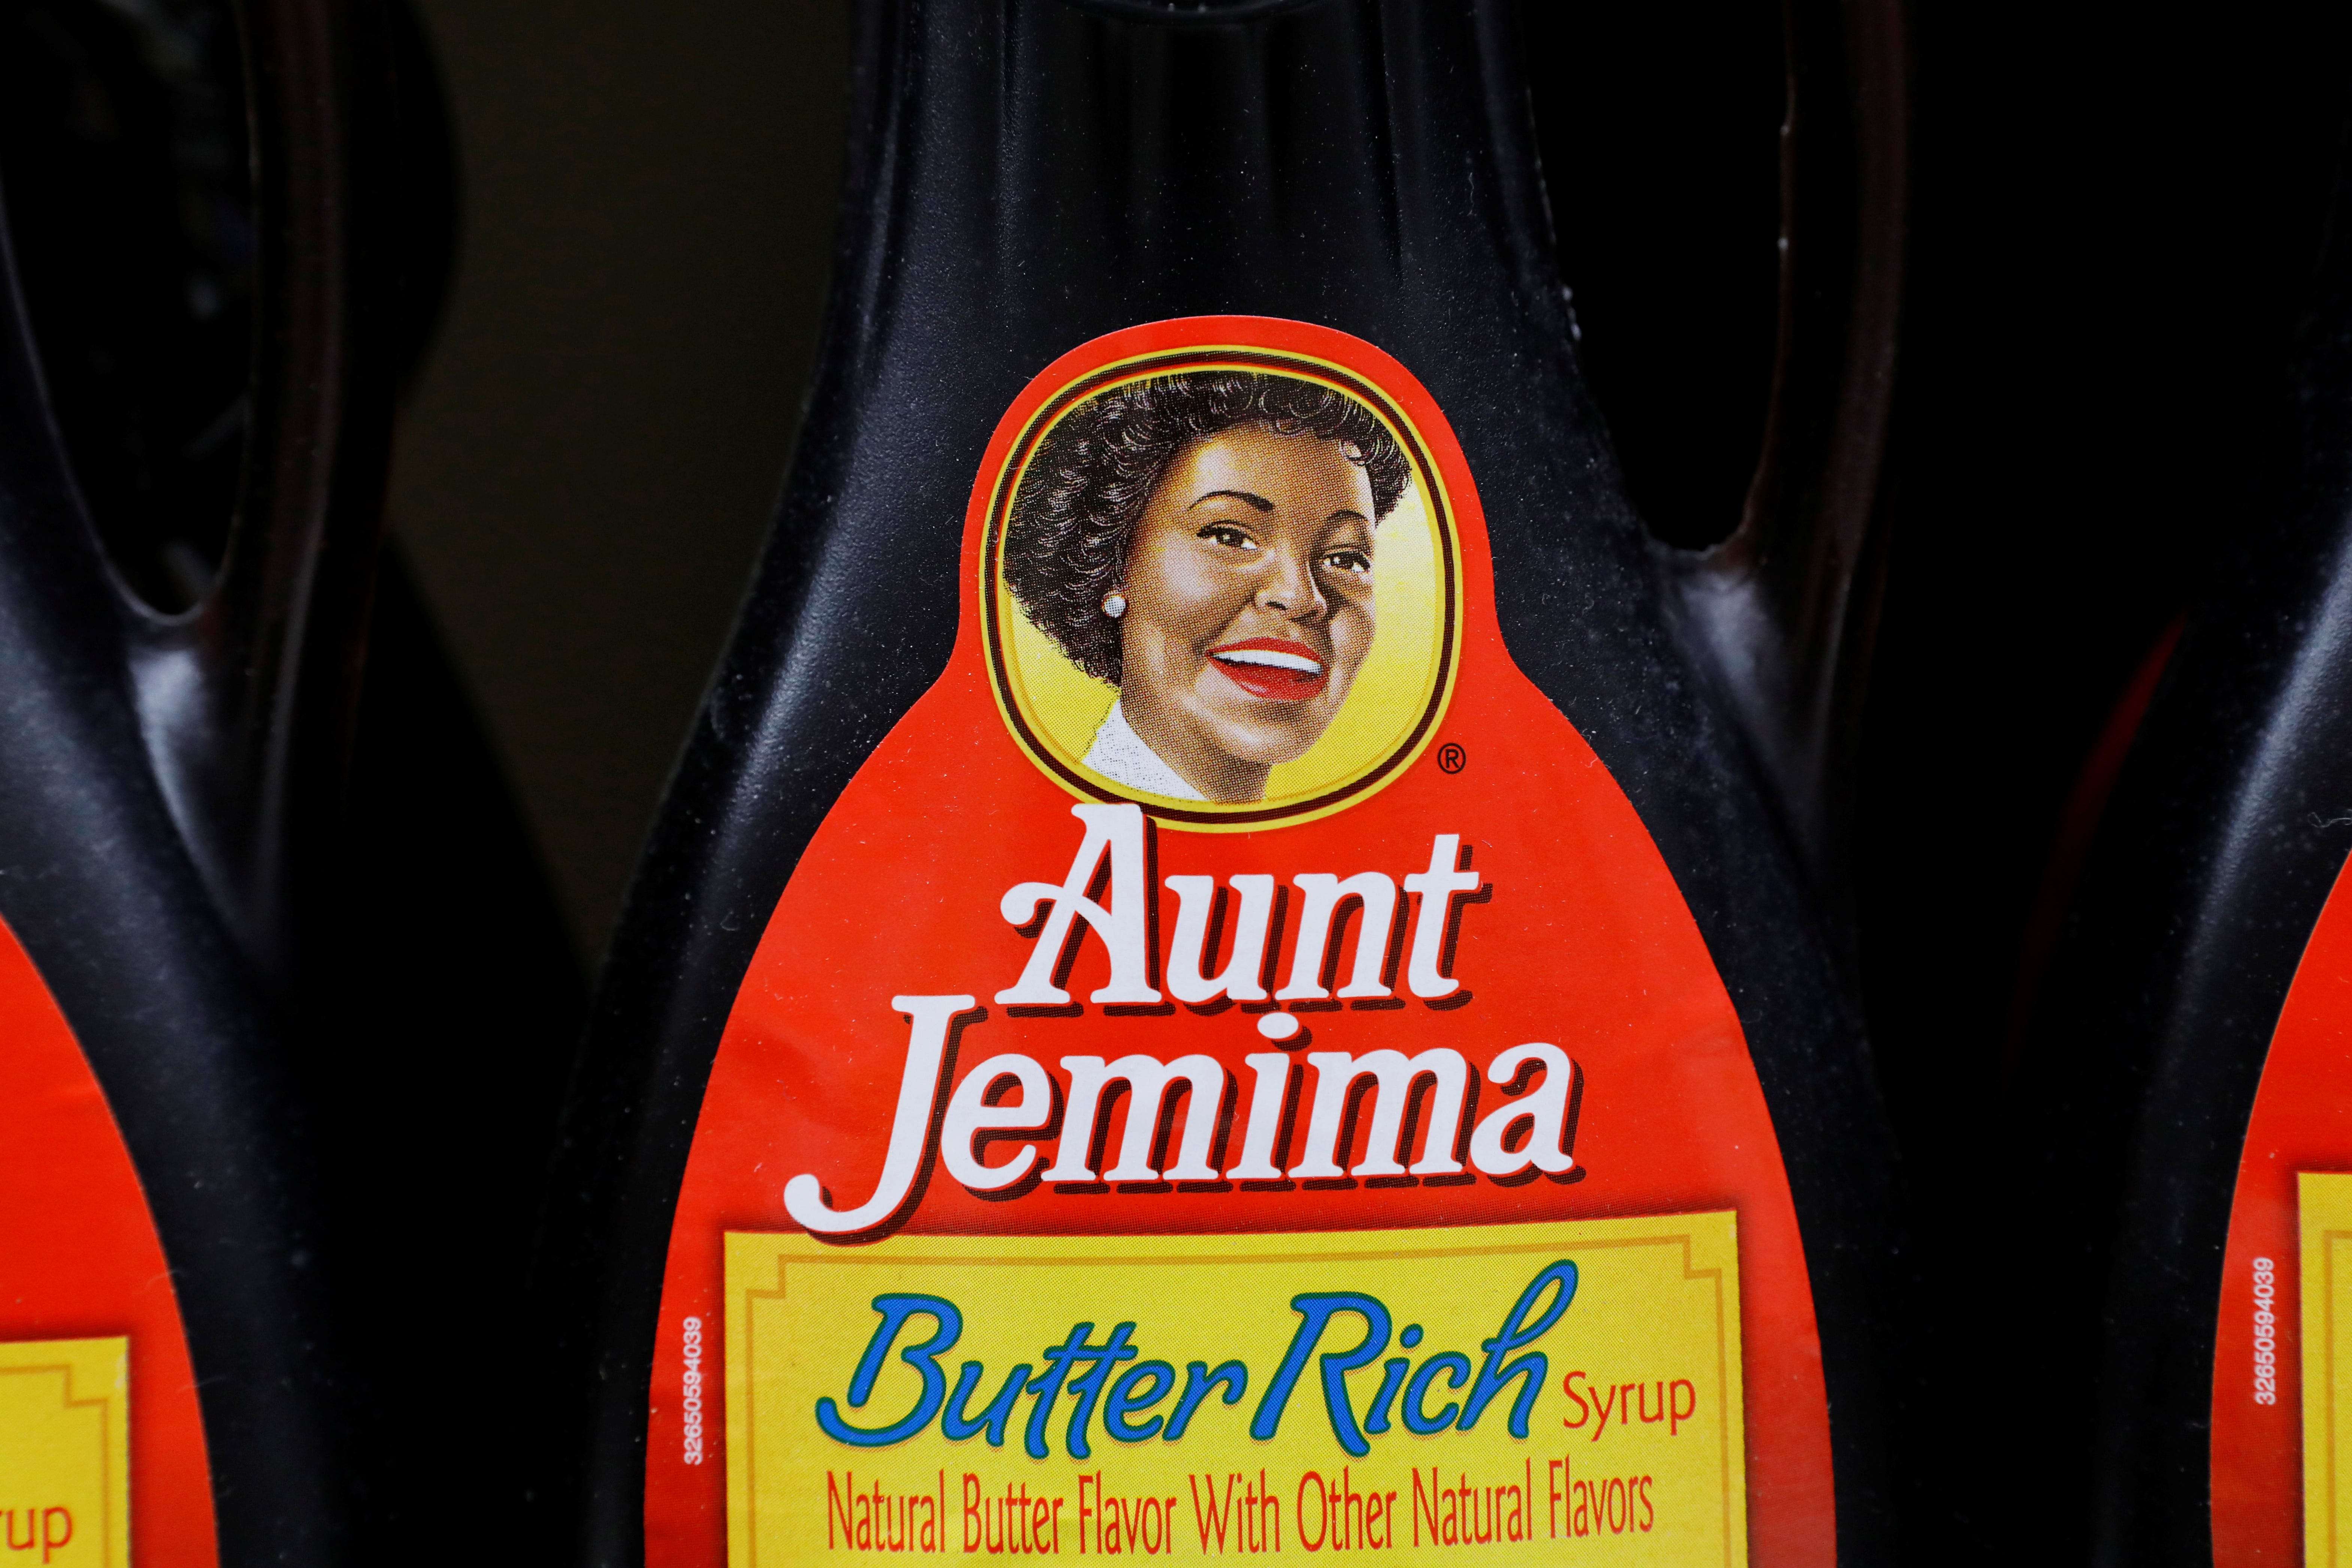 Aunt Jemima's logo has changed 6 times, and its history is rooted in